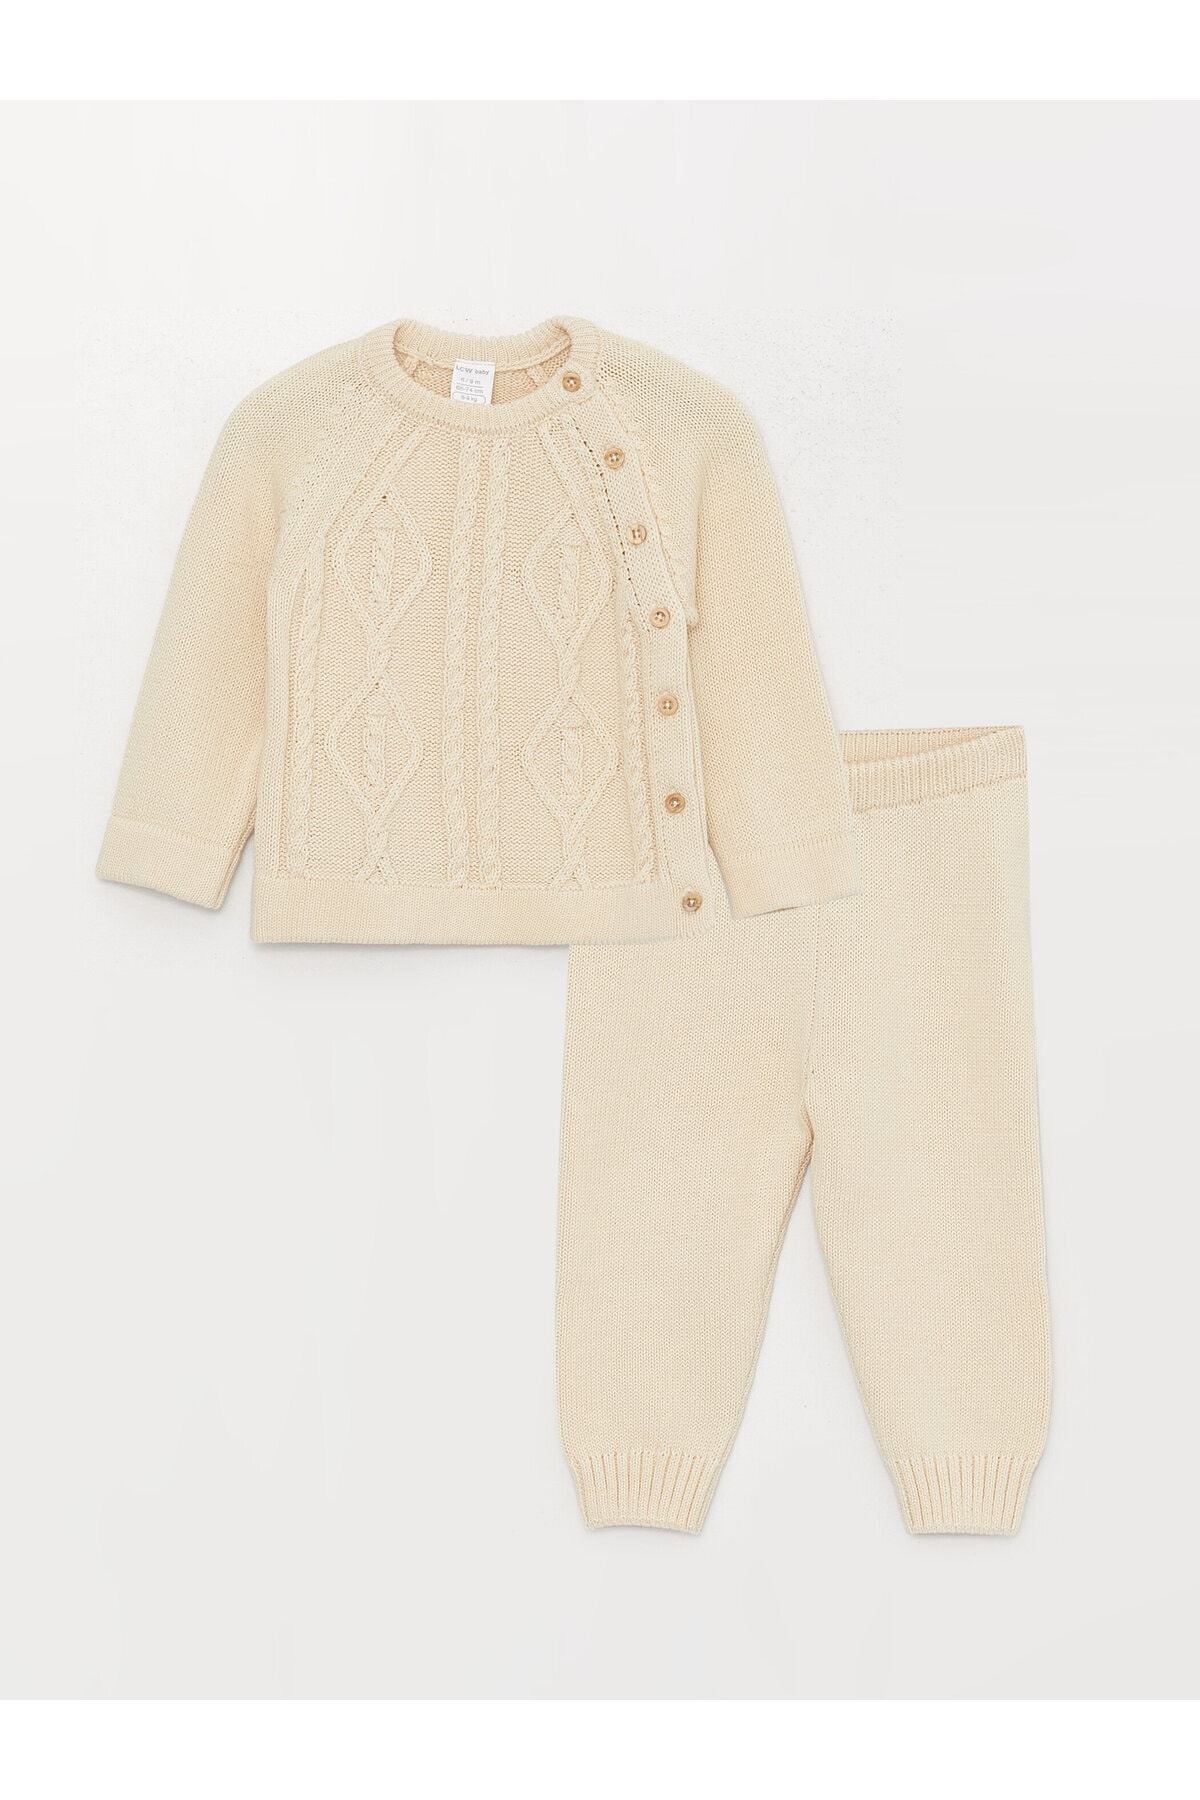 LC Waikiki Crew Neck Self Patterned Long Sleeve Baby Boy Knitwear Cardigan And Trousers